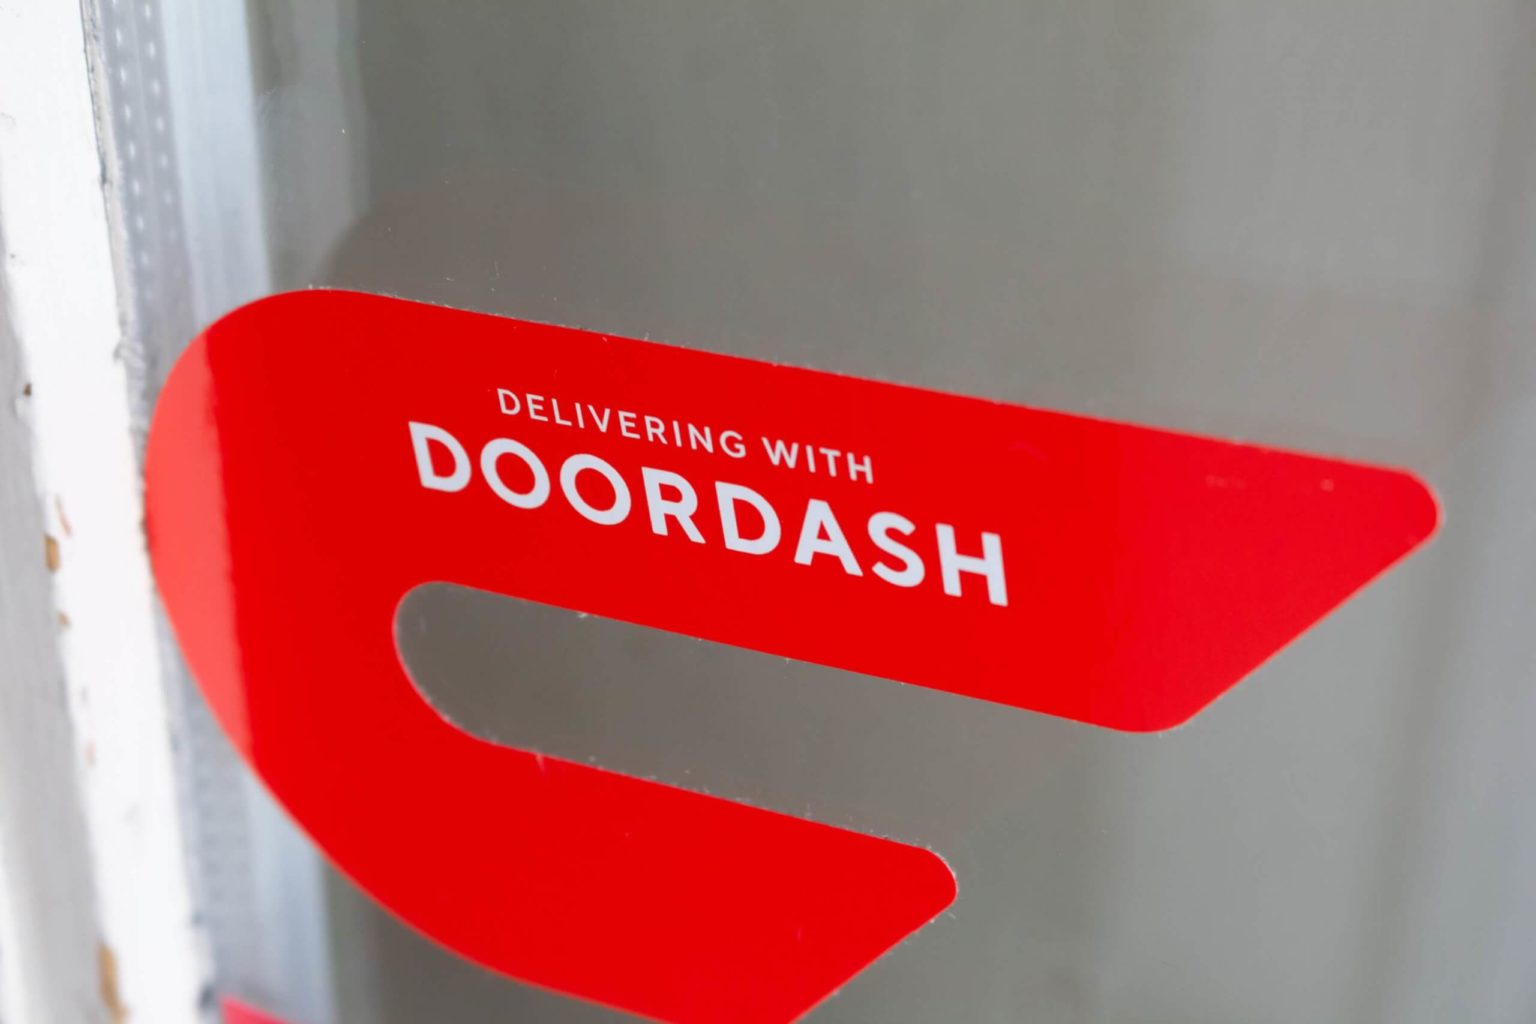 New DoorDash pop-up warns non-tipping customers to expect a longer wait for orders